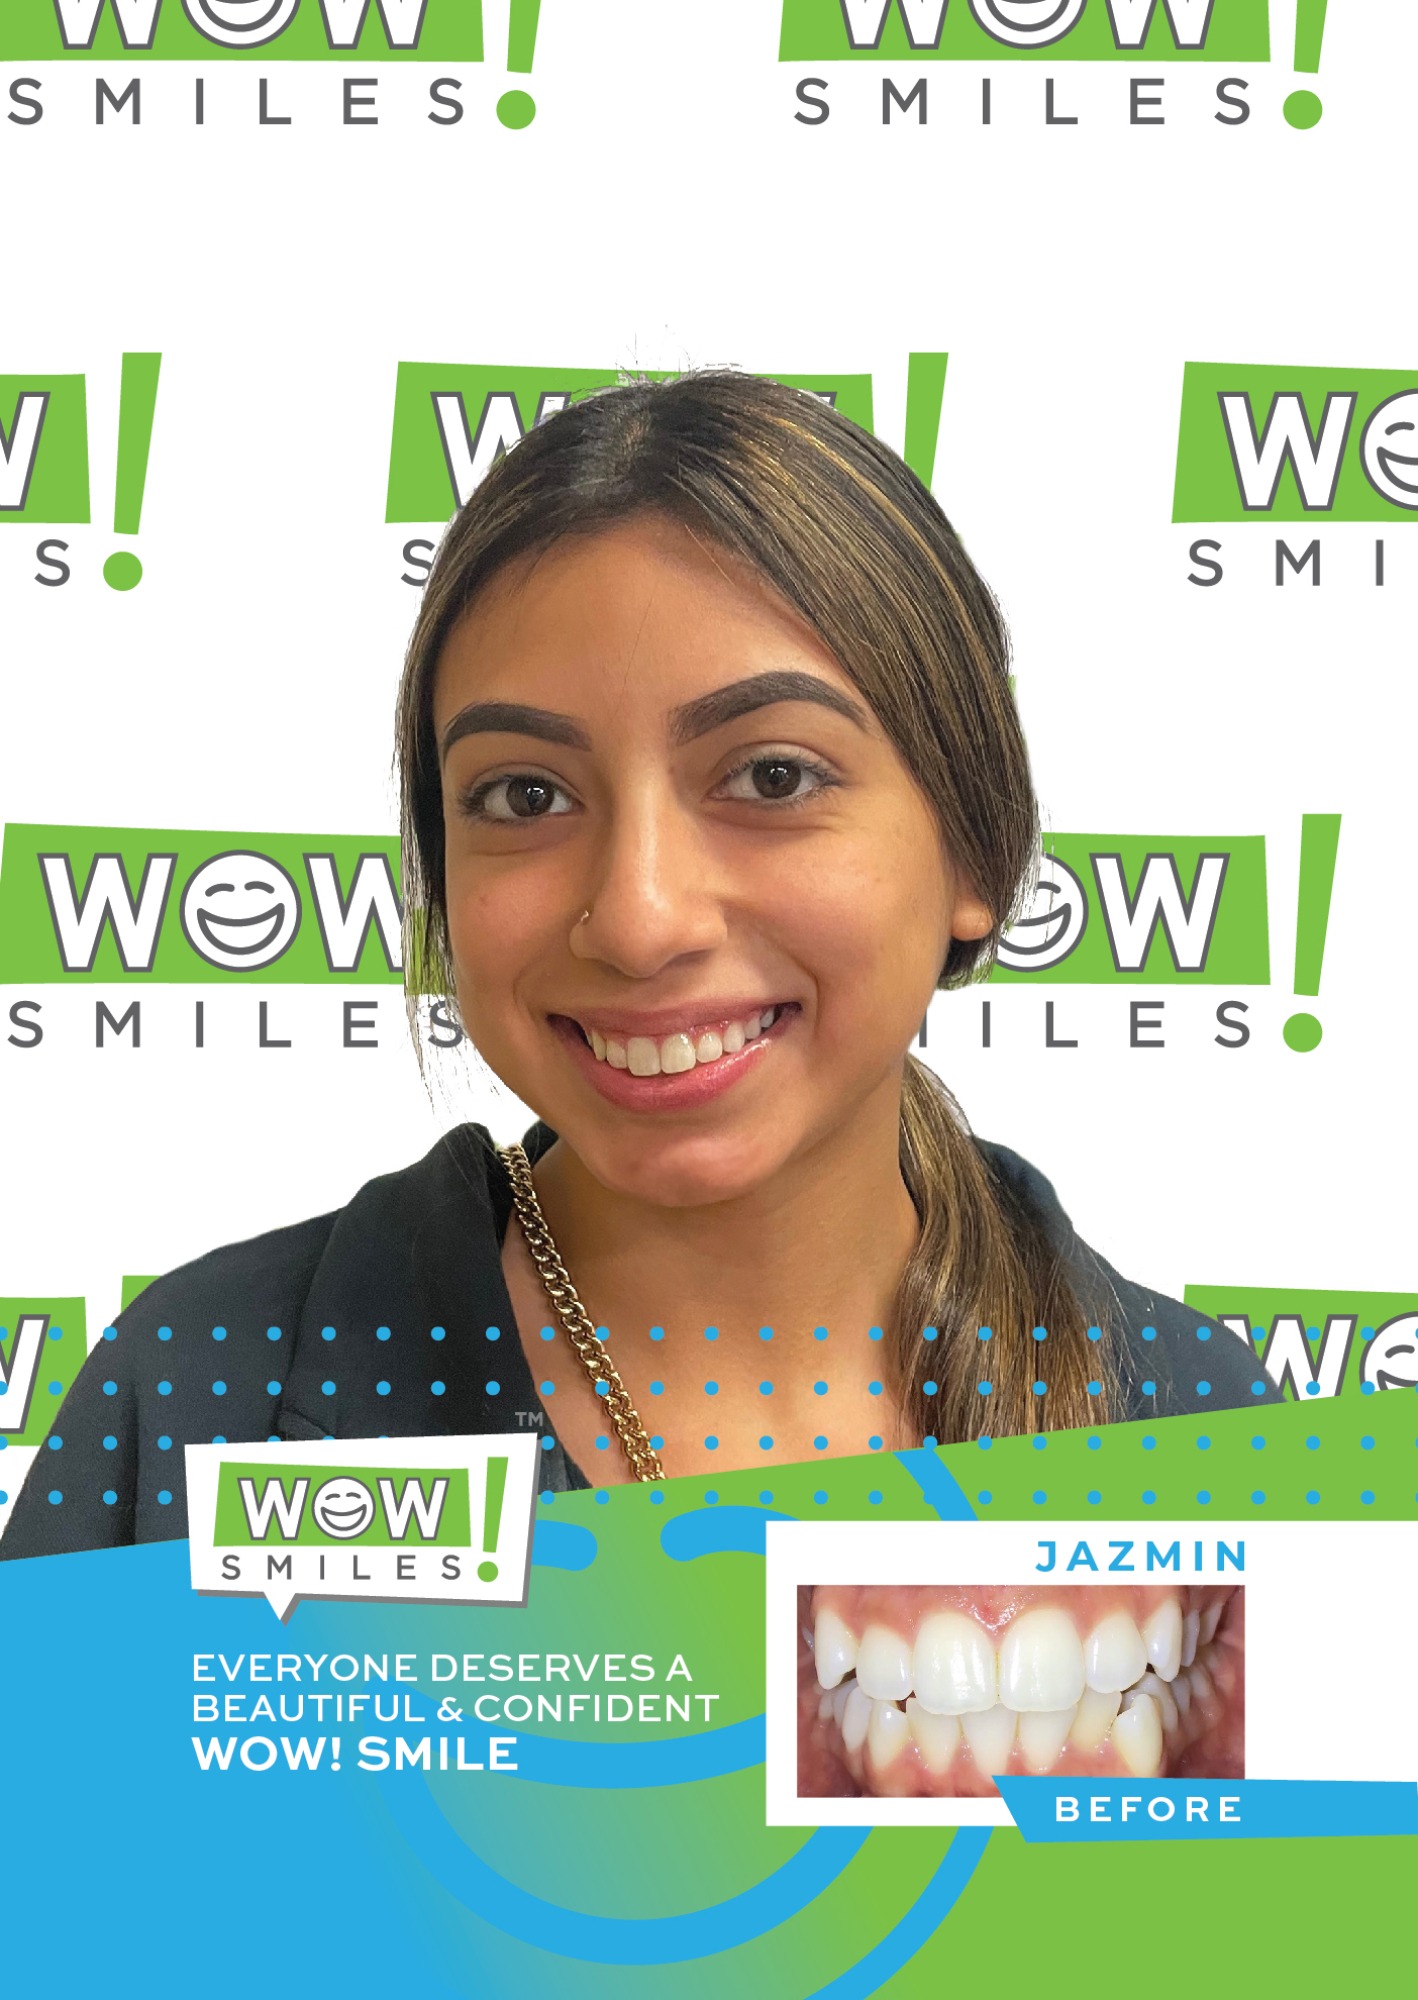 2022-07-20_Wow Smiles_Before and After Posters_Jazmin_CC-01